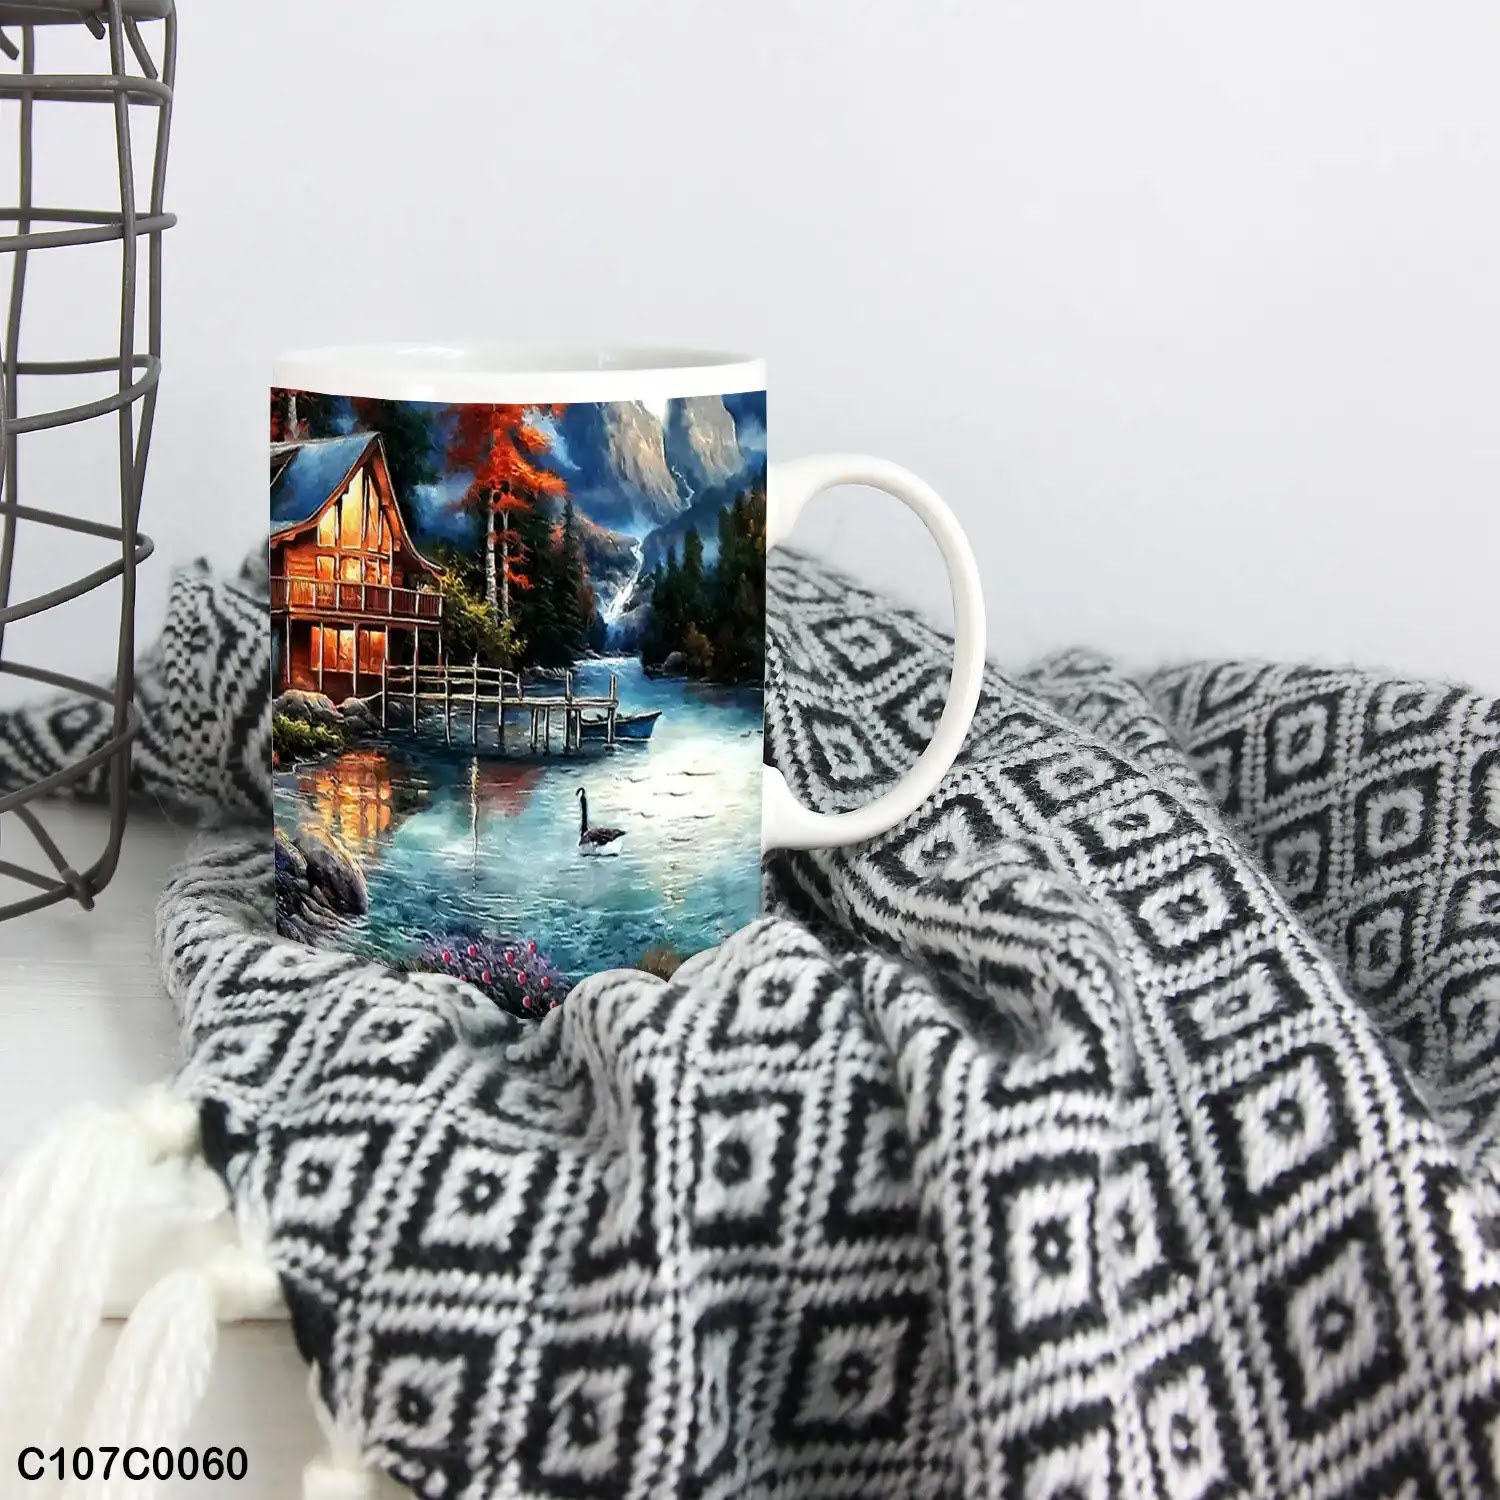 A mug (cup) printed with an image of a cottage in forest